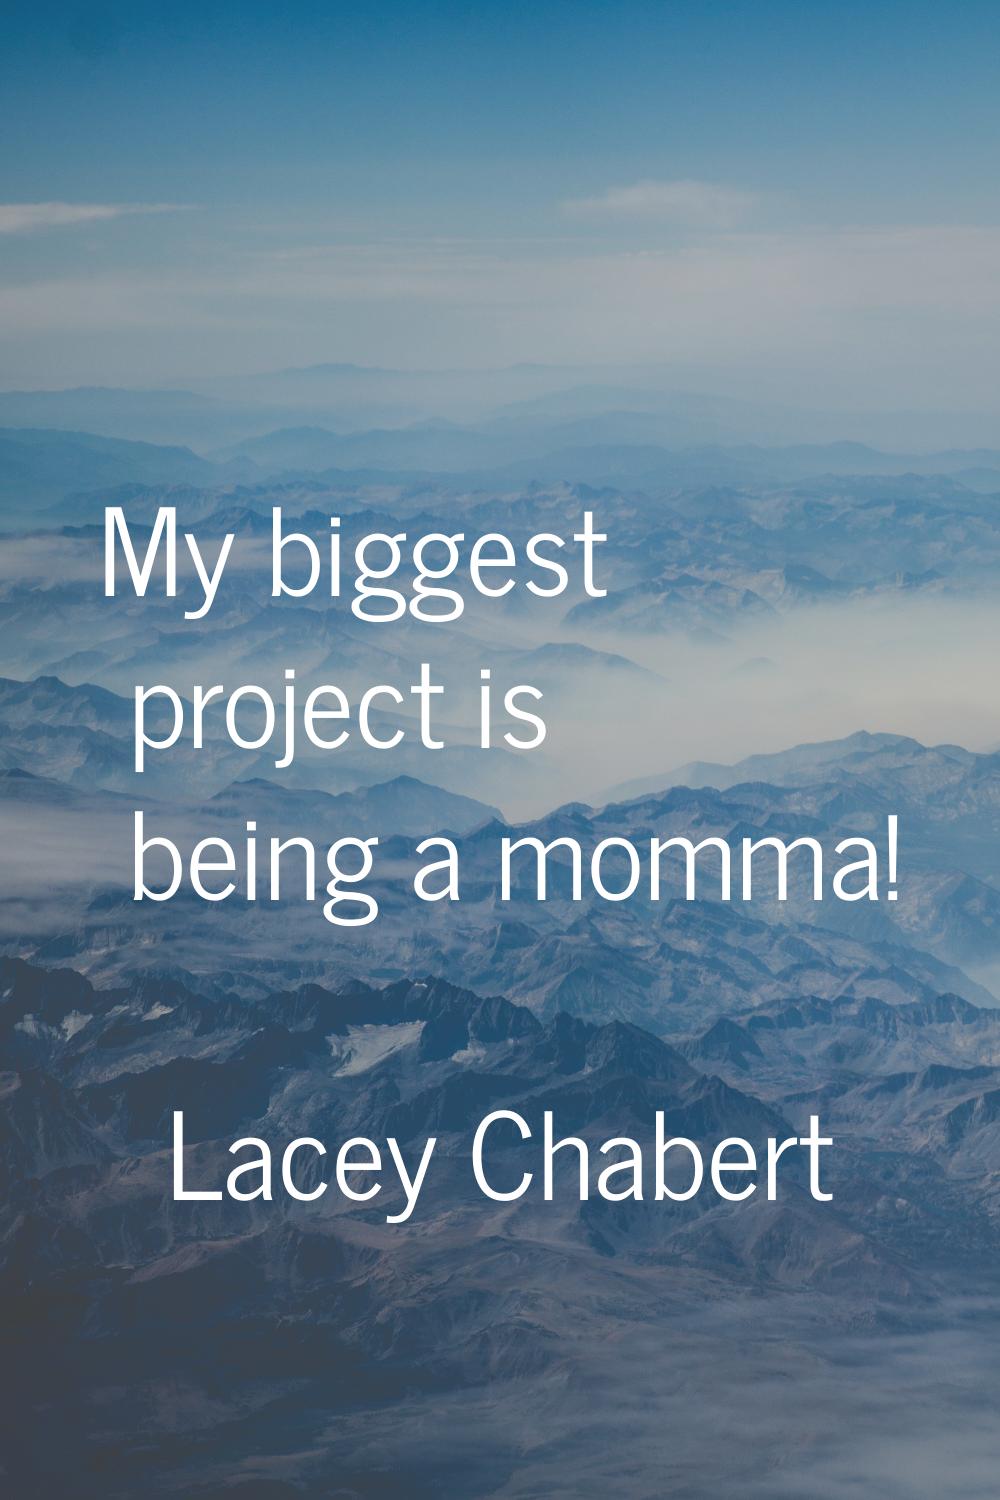 My biggest project is being a momma!